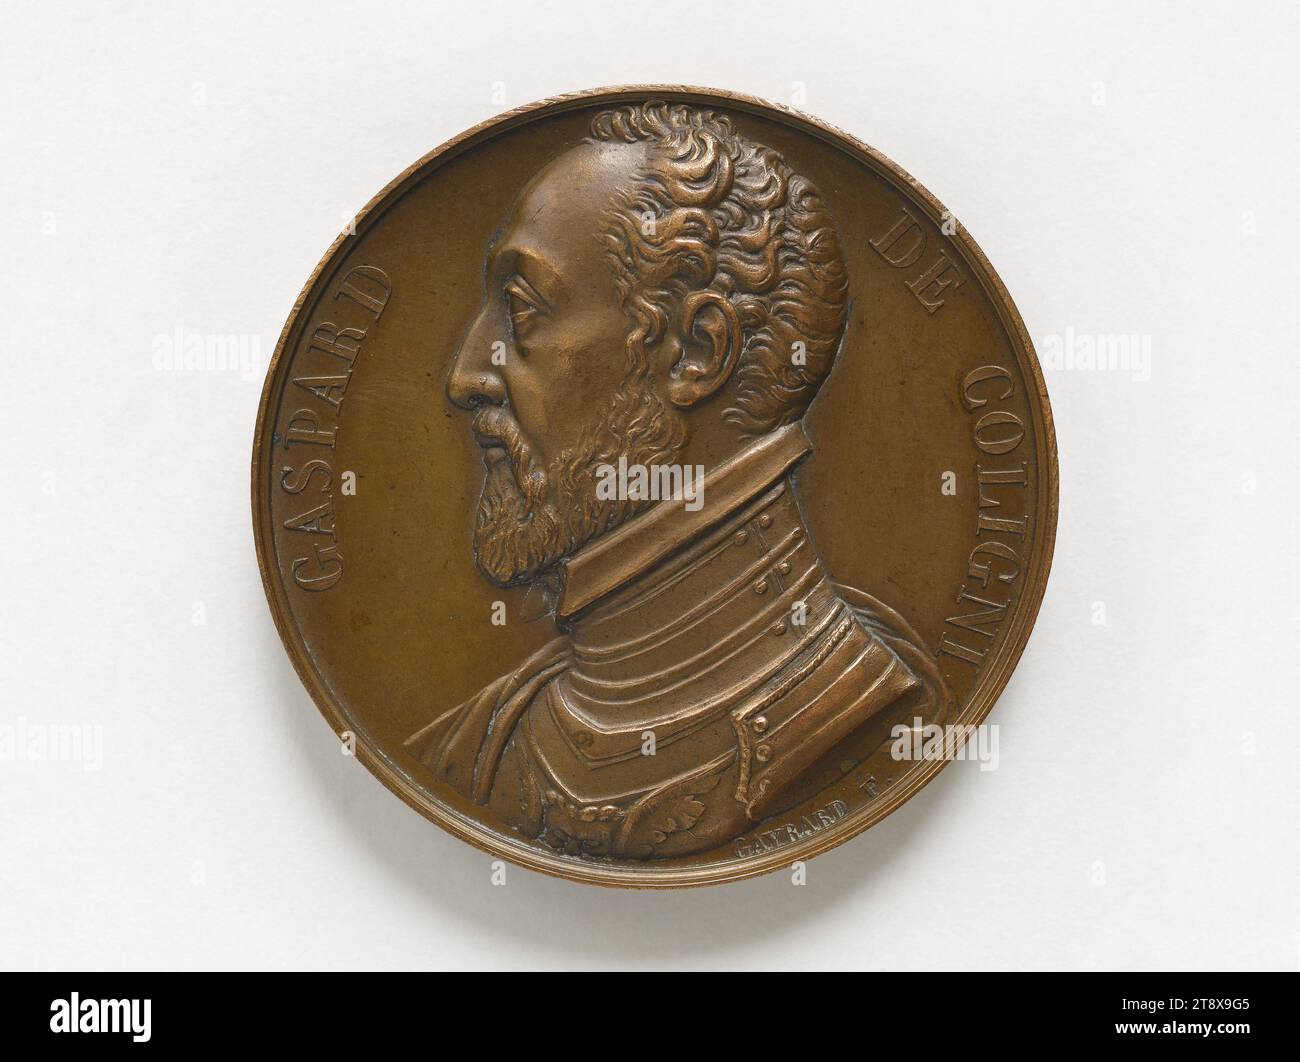 Gaspard de Coligny (1519-1572), Admiral of France, 1821, Gayrard, Raymond, Engraver in Medals, Array, Numismatics, Medal Stock Photo